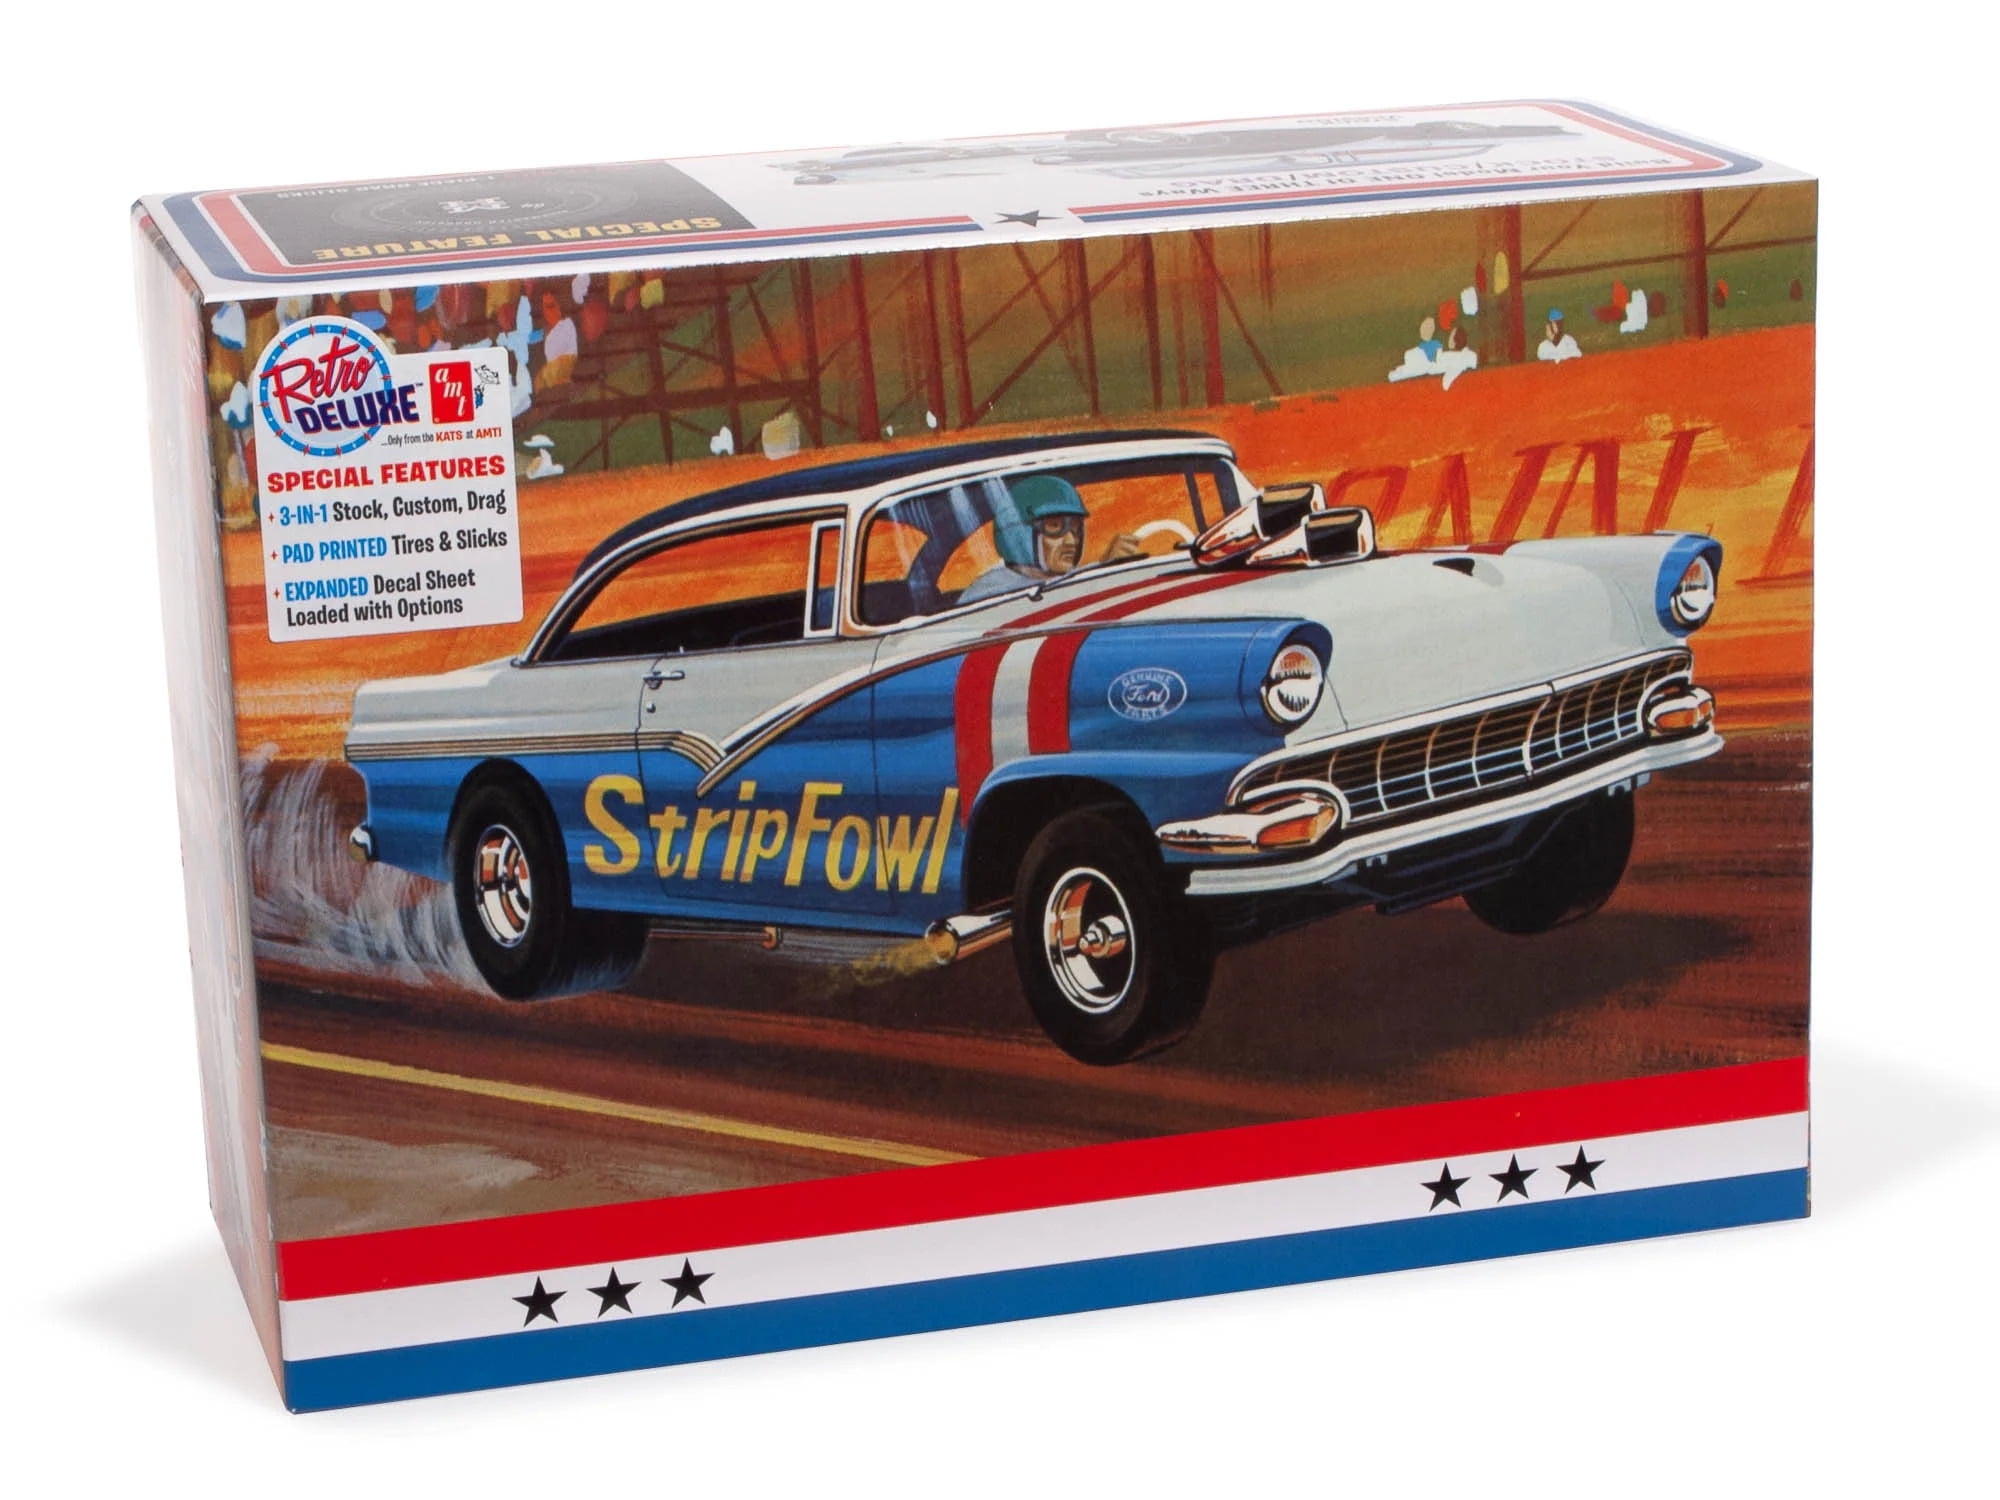 Picture of AMT AMT1308 3-in-1 Skill 2 Model Kit - 1 by 25 Scale Model for 1956 Ford Victoria Hardtop